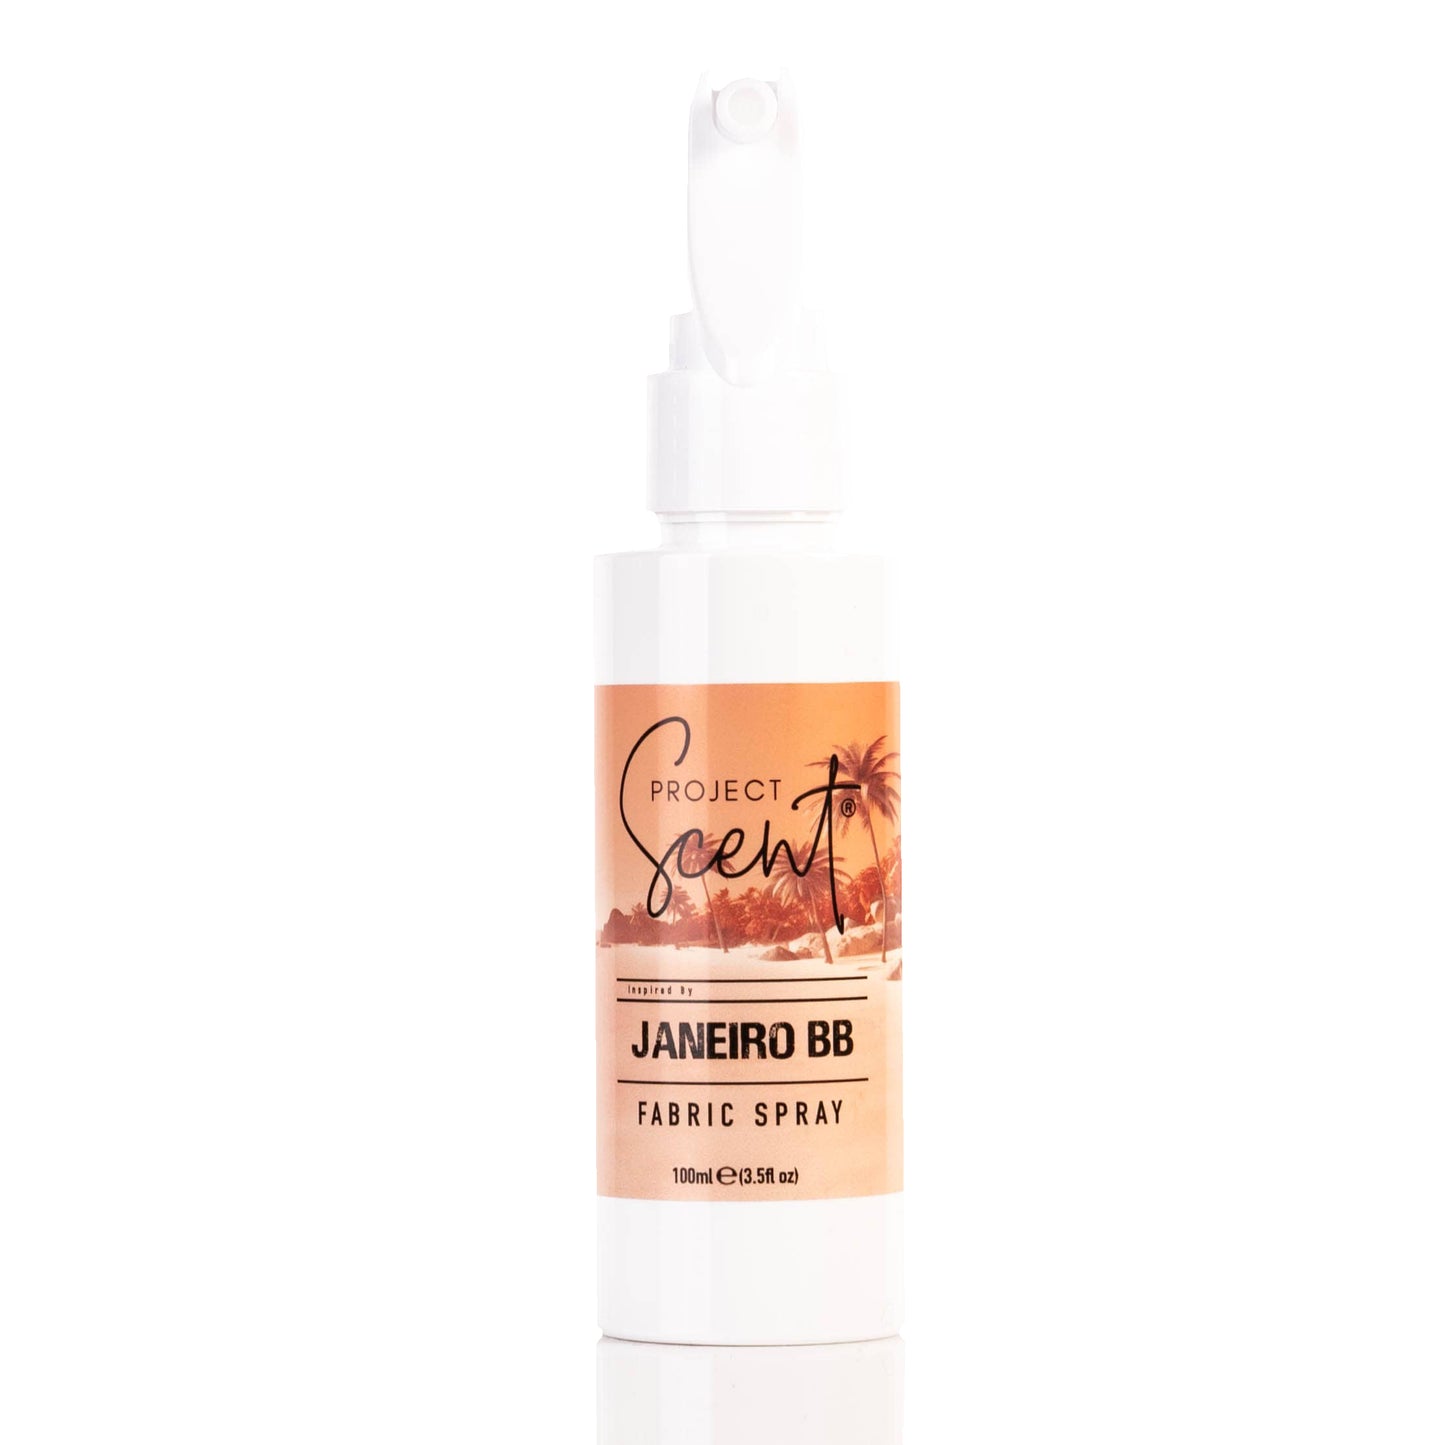 New Project Scent Fabric Spray 100ml